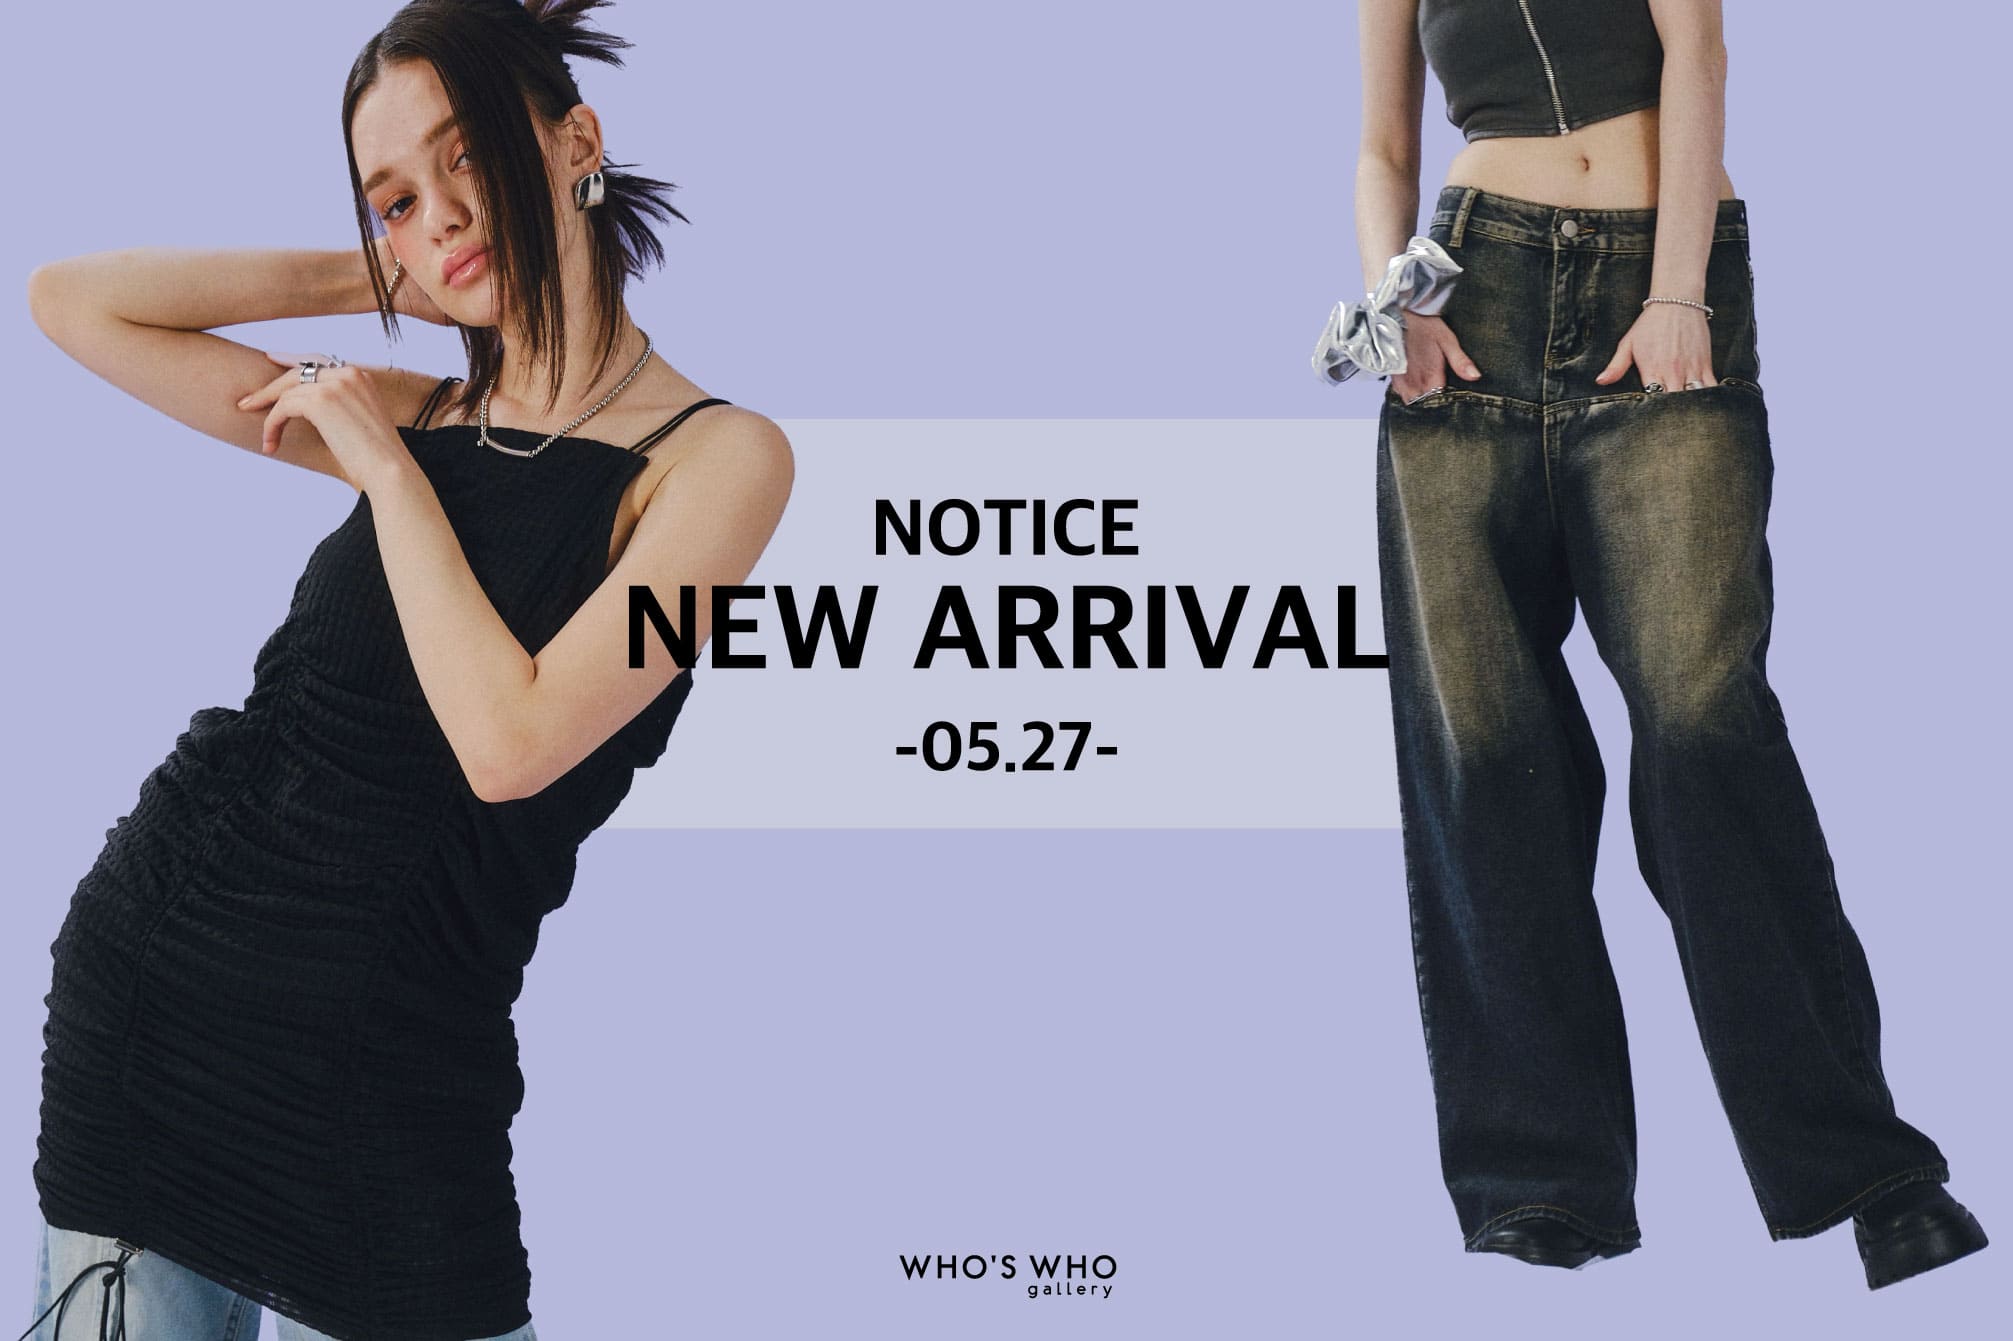 WHO’S WHO gallery 【NEW ARRIVAL NOTICE -05.27-】